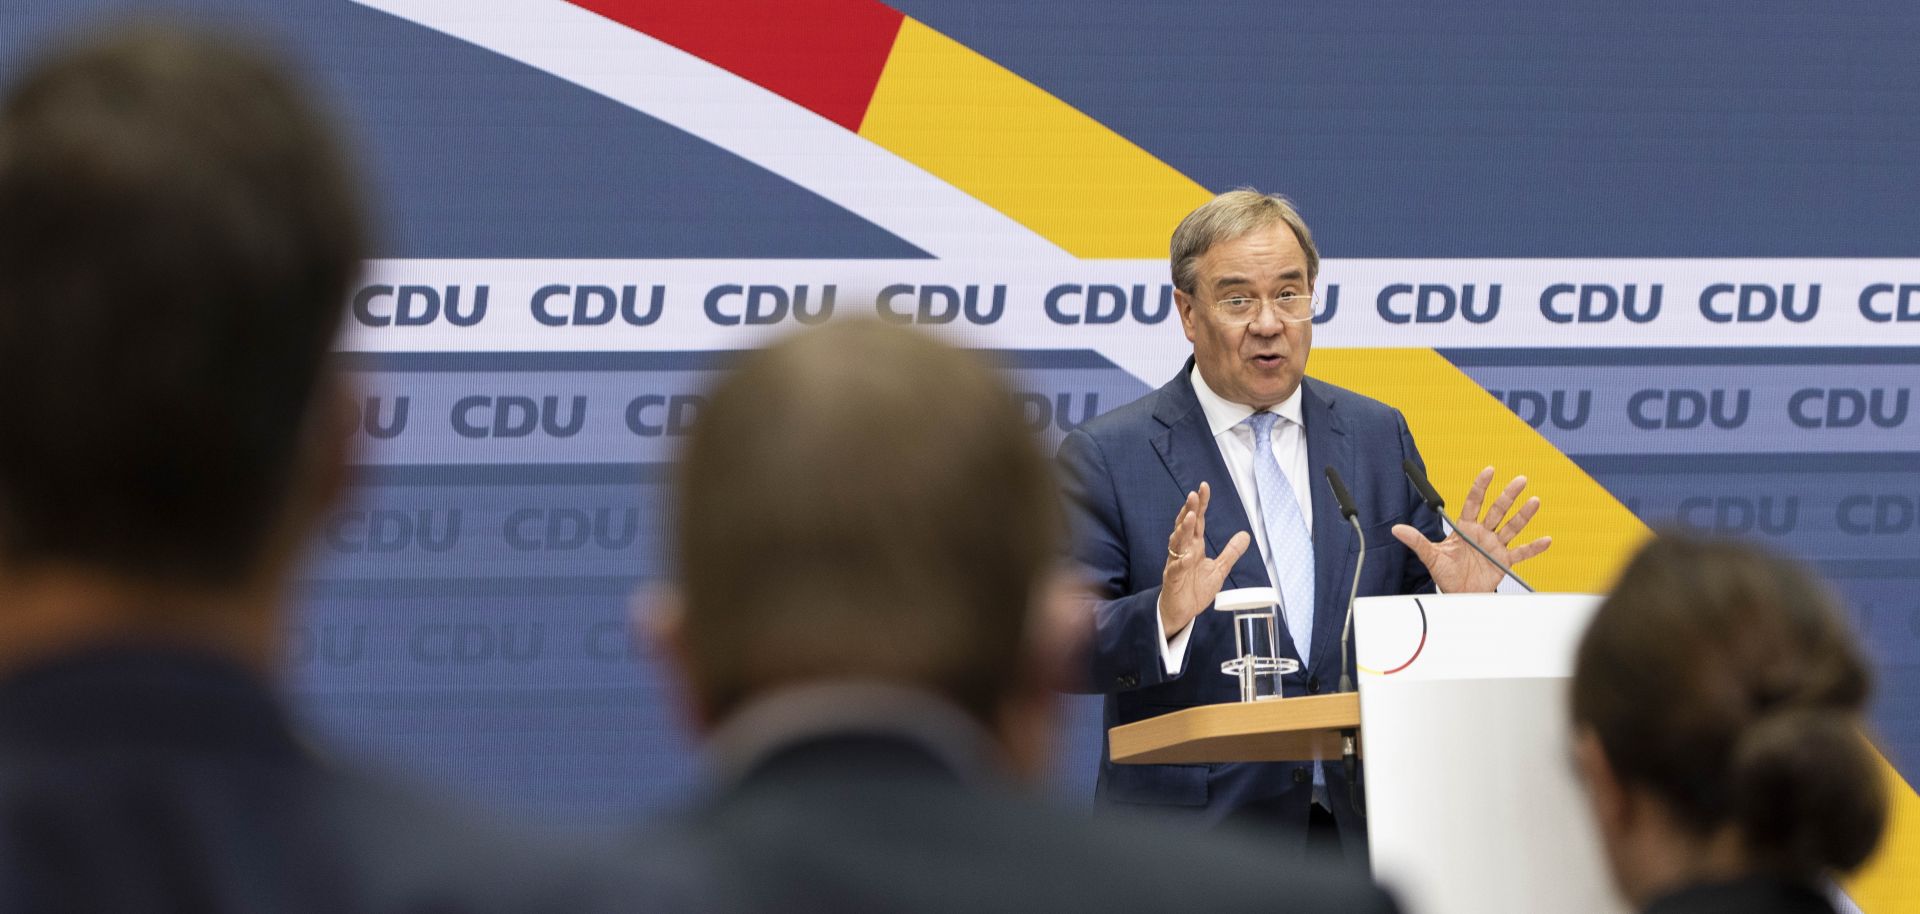 Armin Laschet, the Christian Democratic Union (CDU)’s chancellor candidate, speaks at the press conference in Berlin on Sept. 27, 2021, the day after Germany's federal election. 